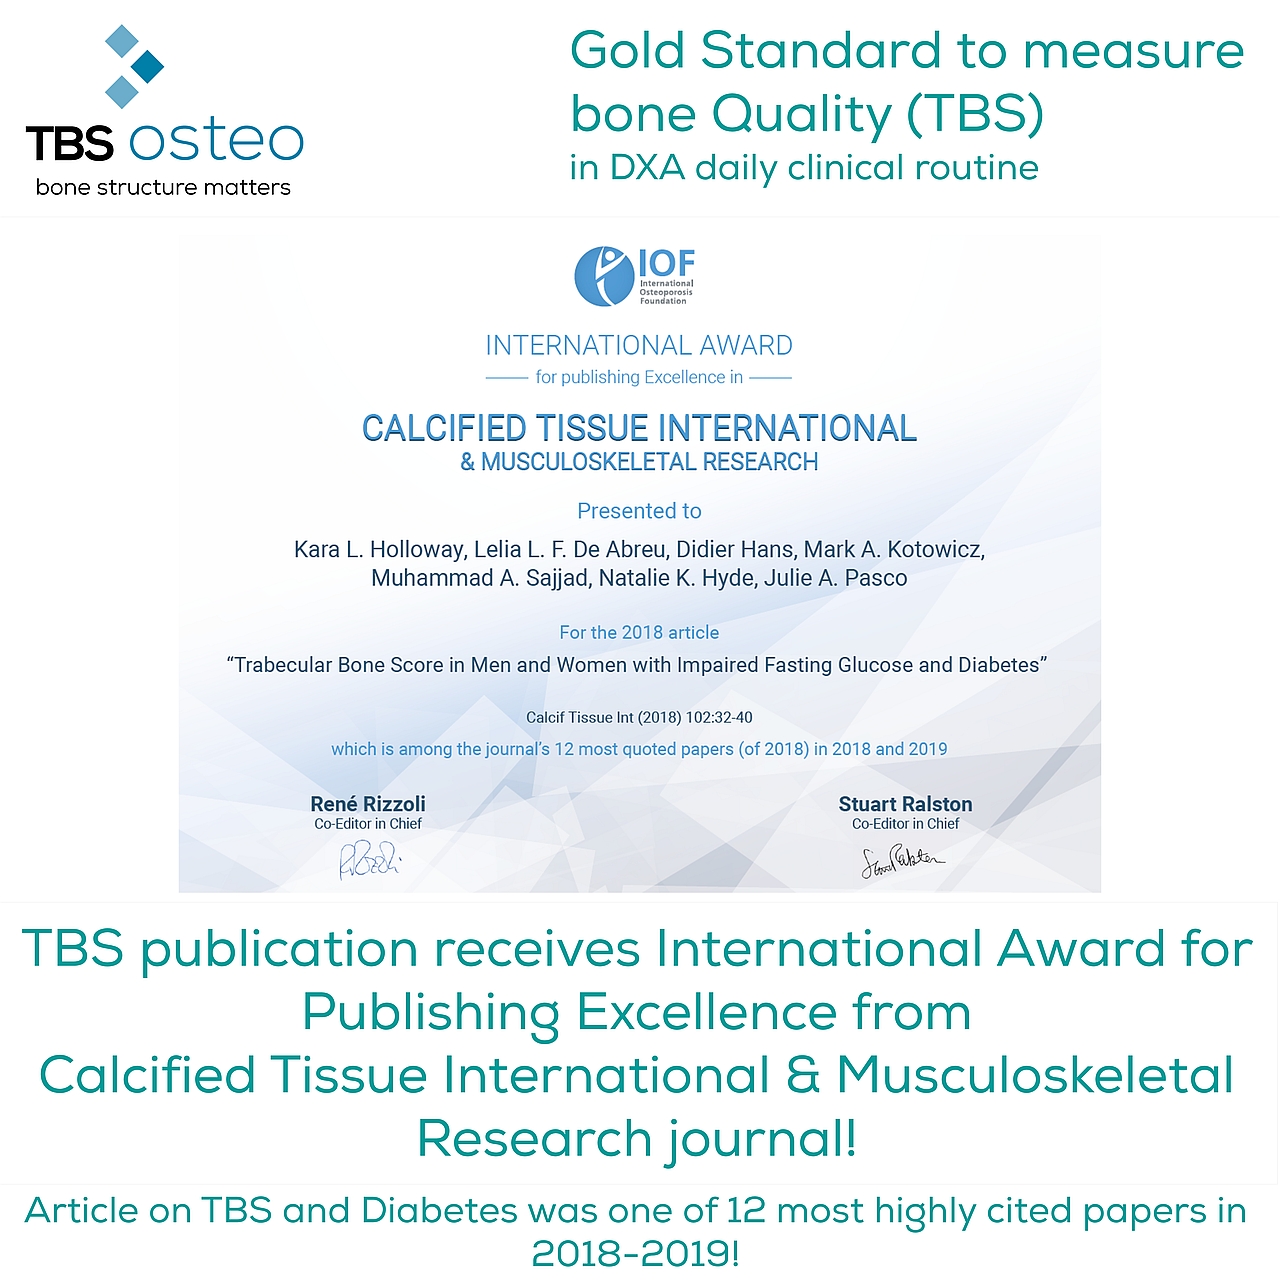 TBS publication receives International Award for Publishing Excellence from Calcified Tissue International & Musculoskeletal Research